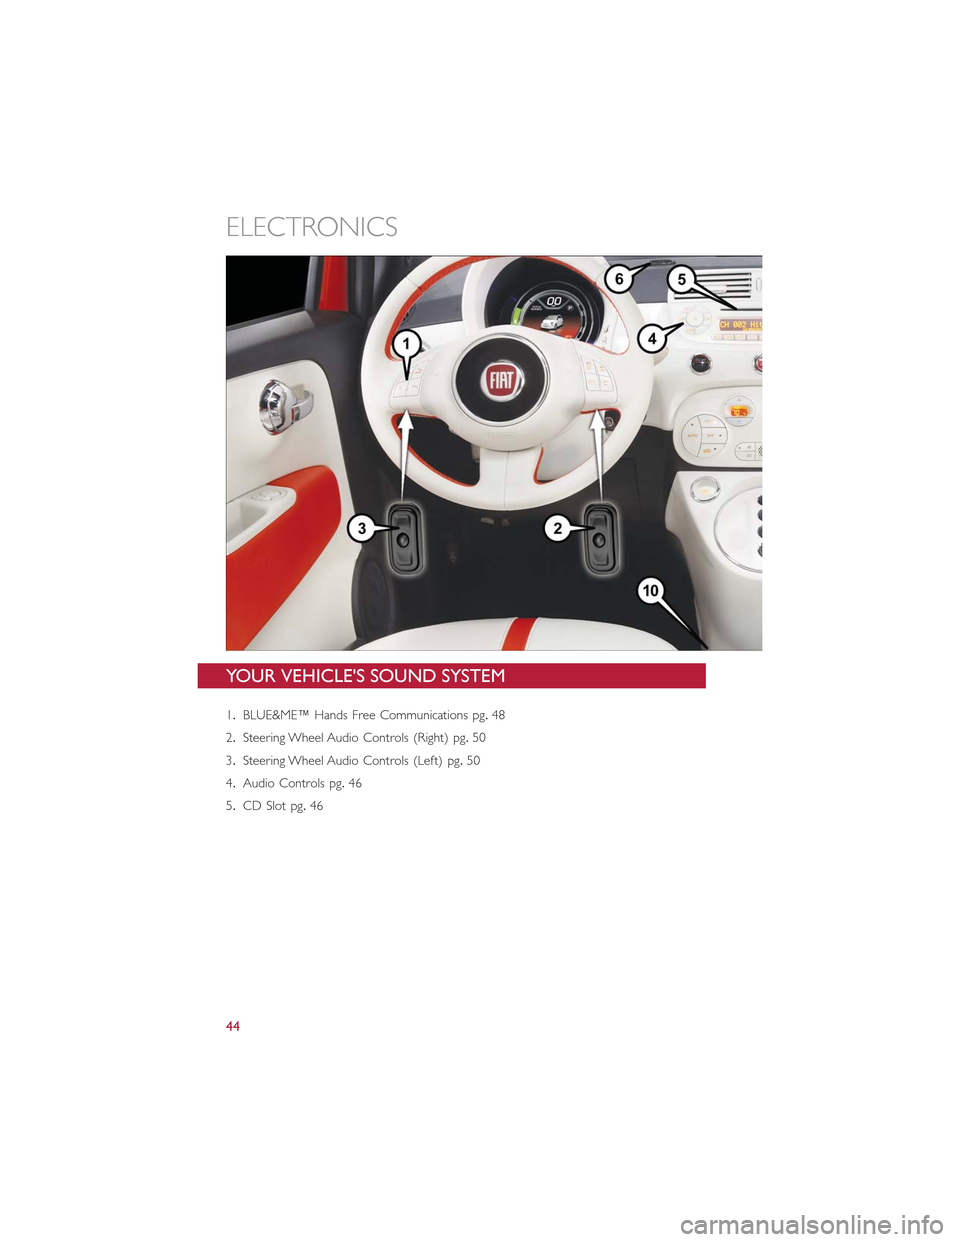 FIAT 500E 2015 2.G Service Manual YOUR VEHICLES SOUND SYSTEM
1.BLUE&ME™ Hands Free Communications pg.48
2.Steering Wheel Audio Controls (Right) pg.50
3.Steering Wheel Audio Controls (Left) pg.50
4.Audio Controls pg.46
5.CD Slot pg.